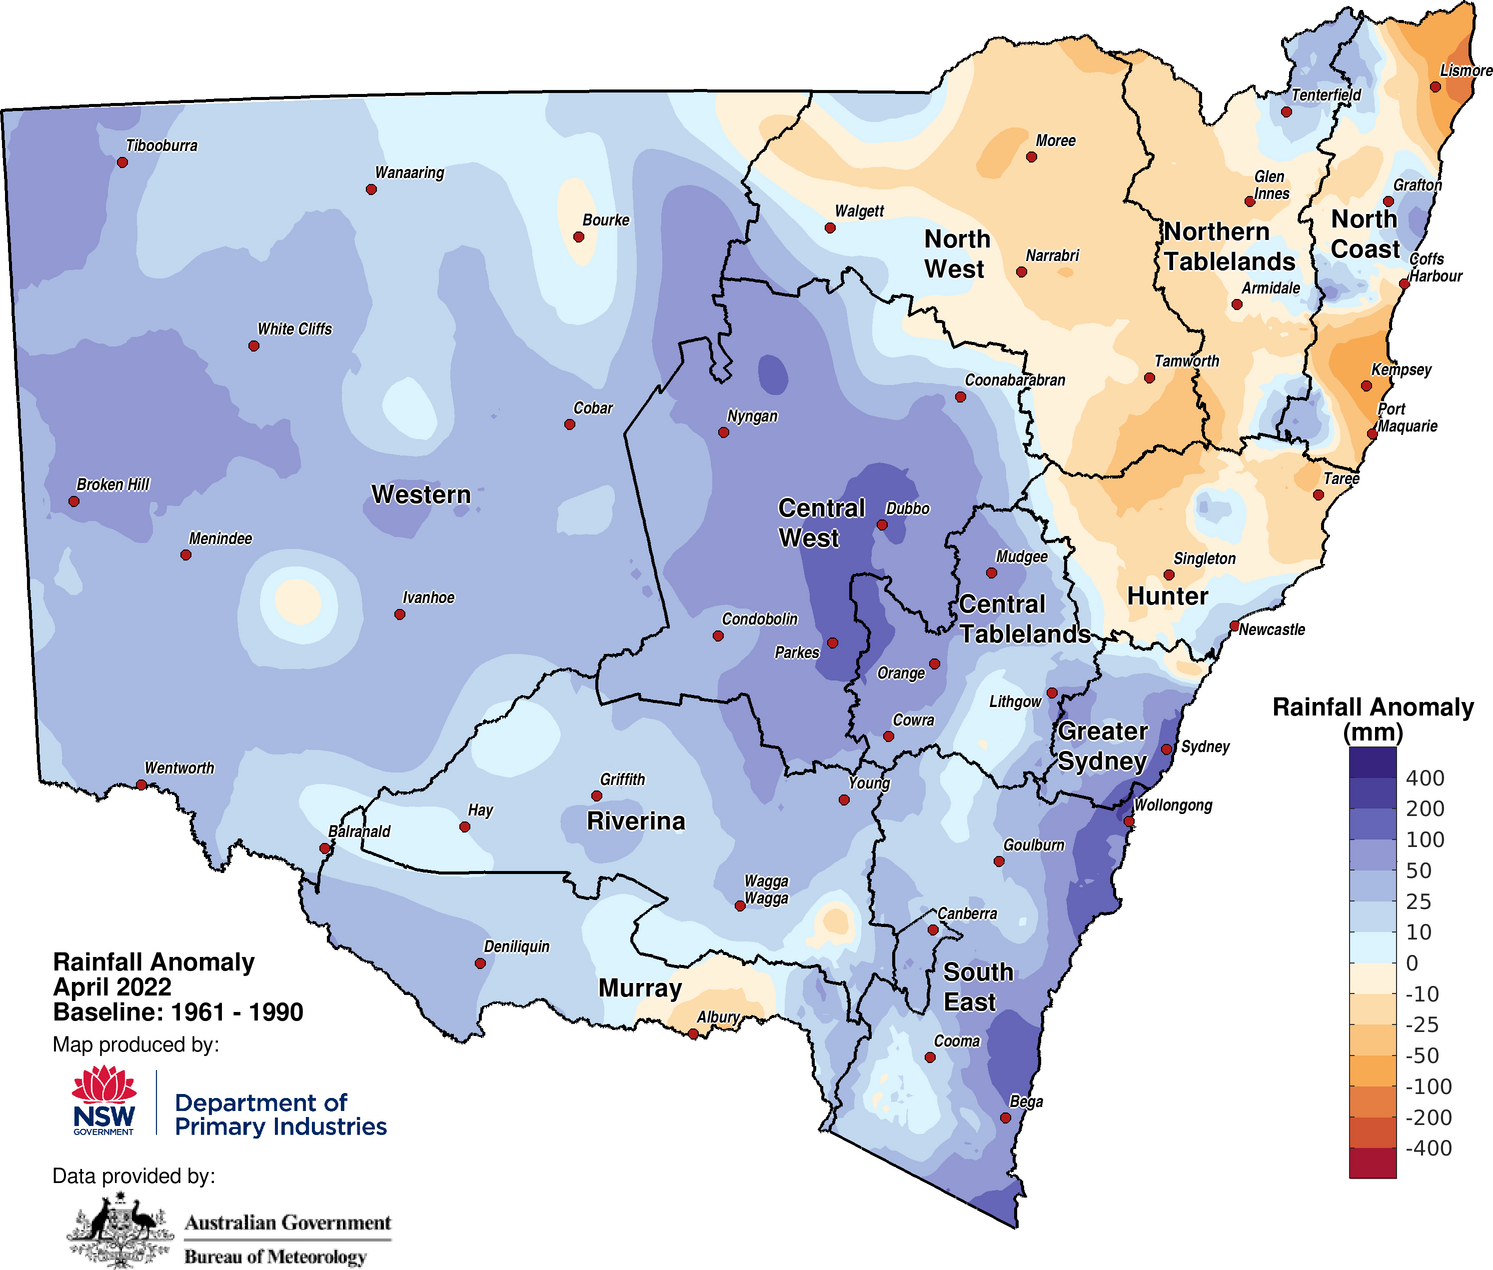 Figure 2a. Rainfall anomaly – April 2022